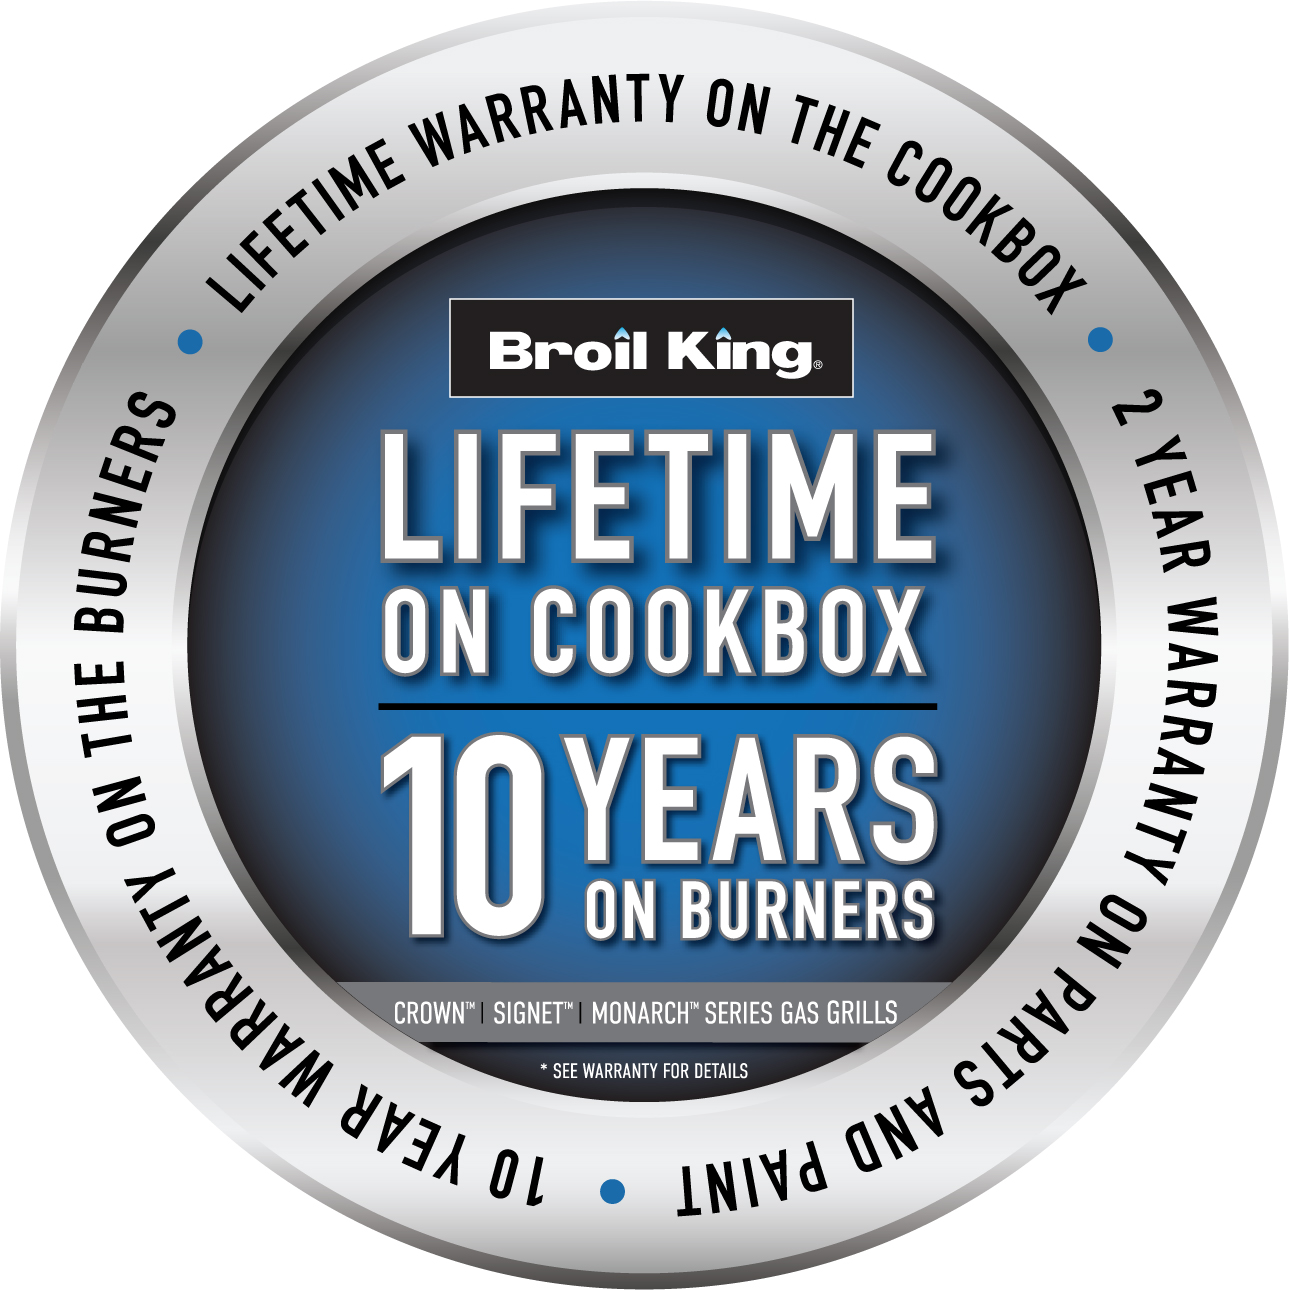 Broil King Limited Lifetime Cookbox/ 10 year Burners Warranty